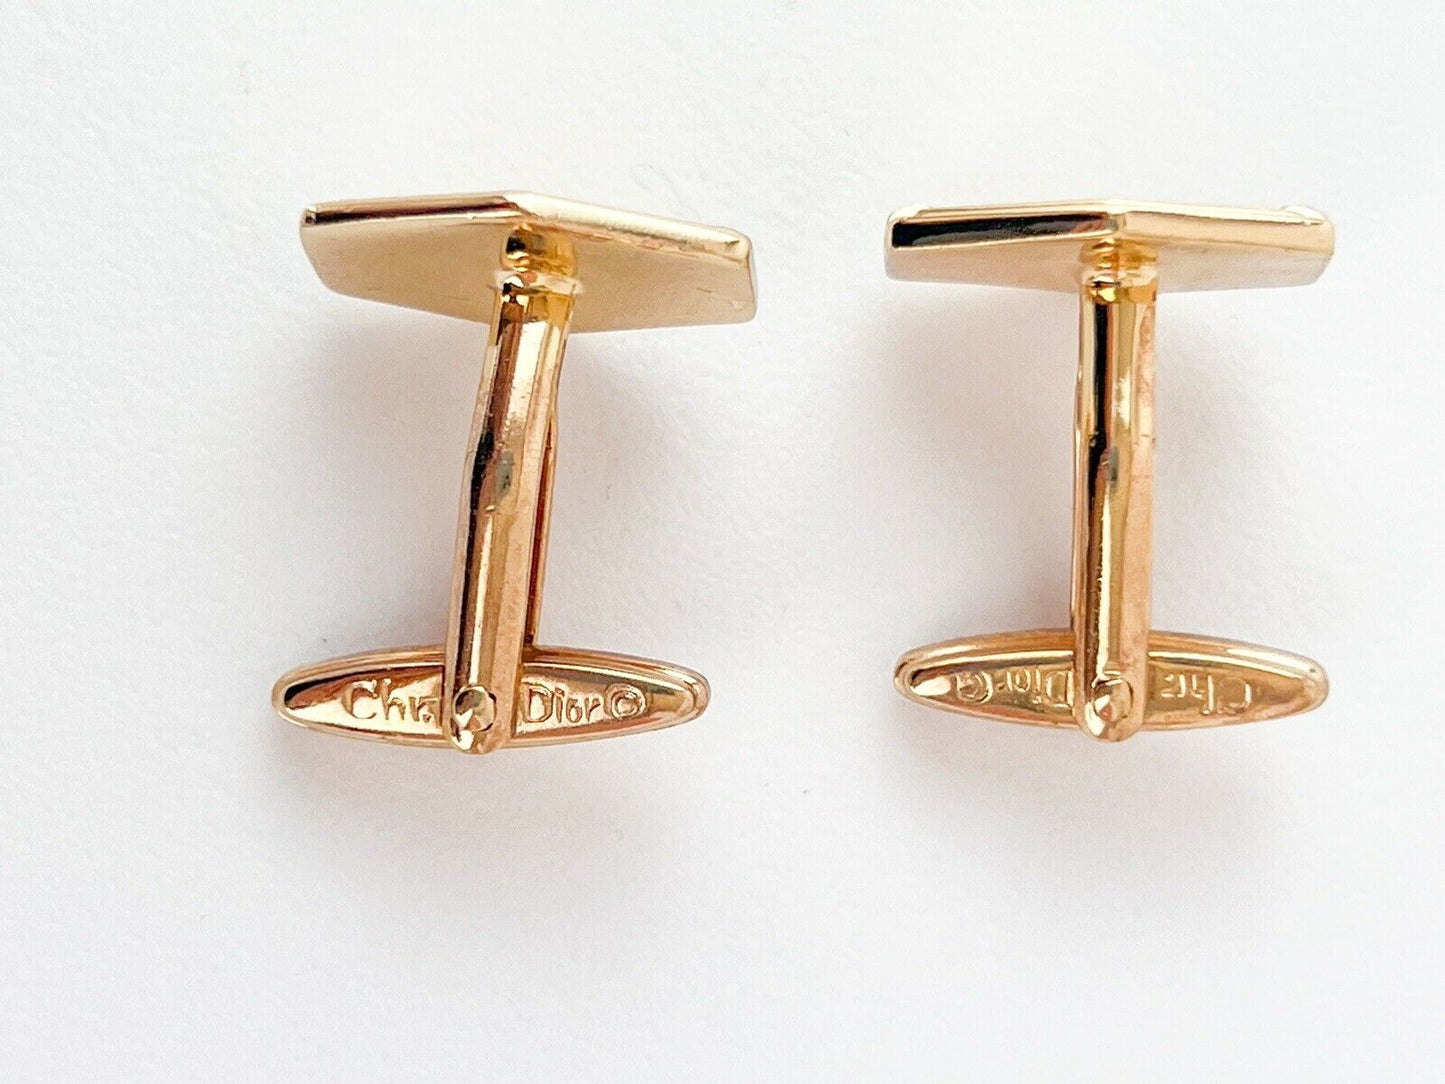 【SOLD OUT】Christian Dior Germany Gold Tone Vintage Cufflinks CD initial Logo